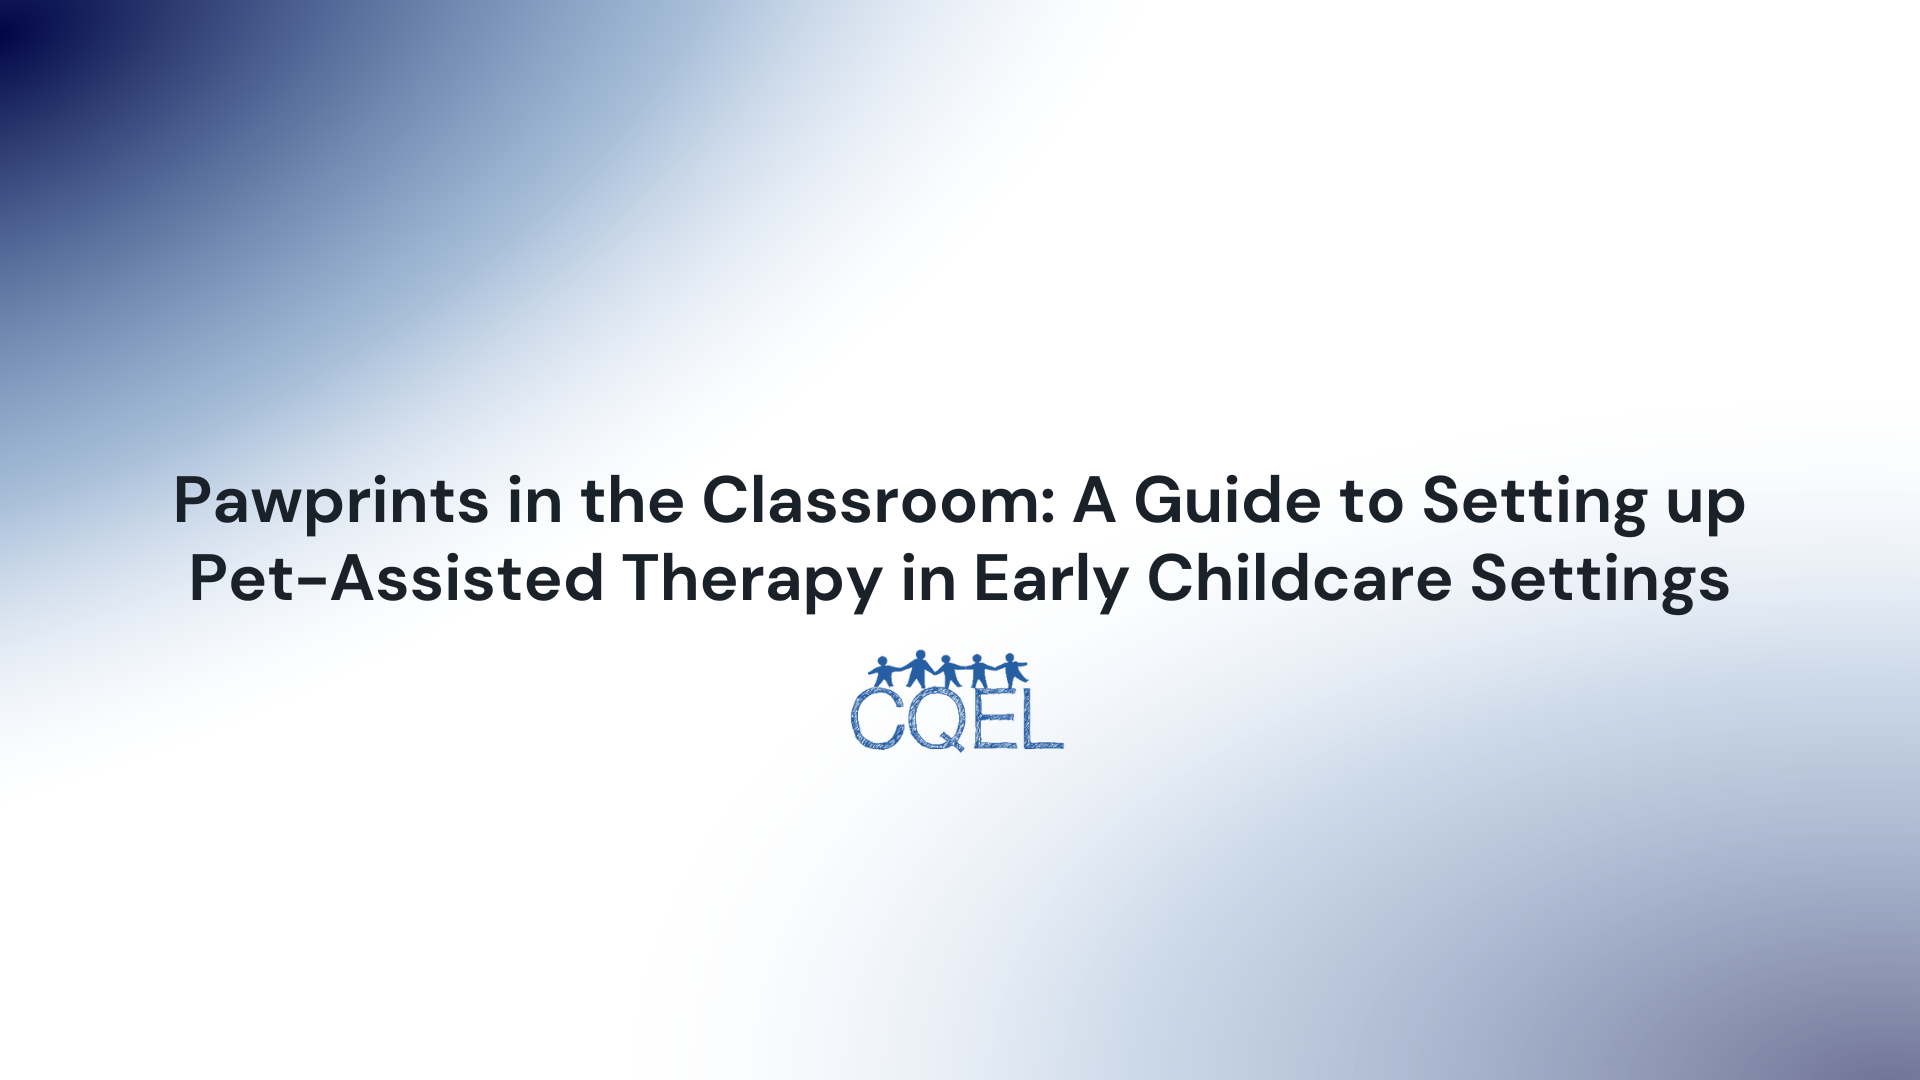 Pawprints in the Classroom: A Guide to Setting up Pet-Assisted Therapy in Early Childcare Settings